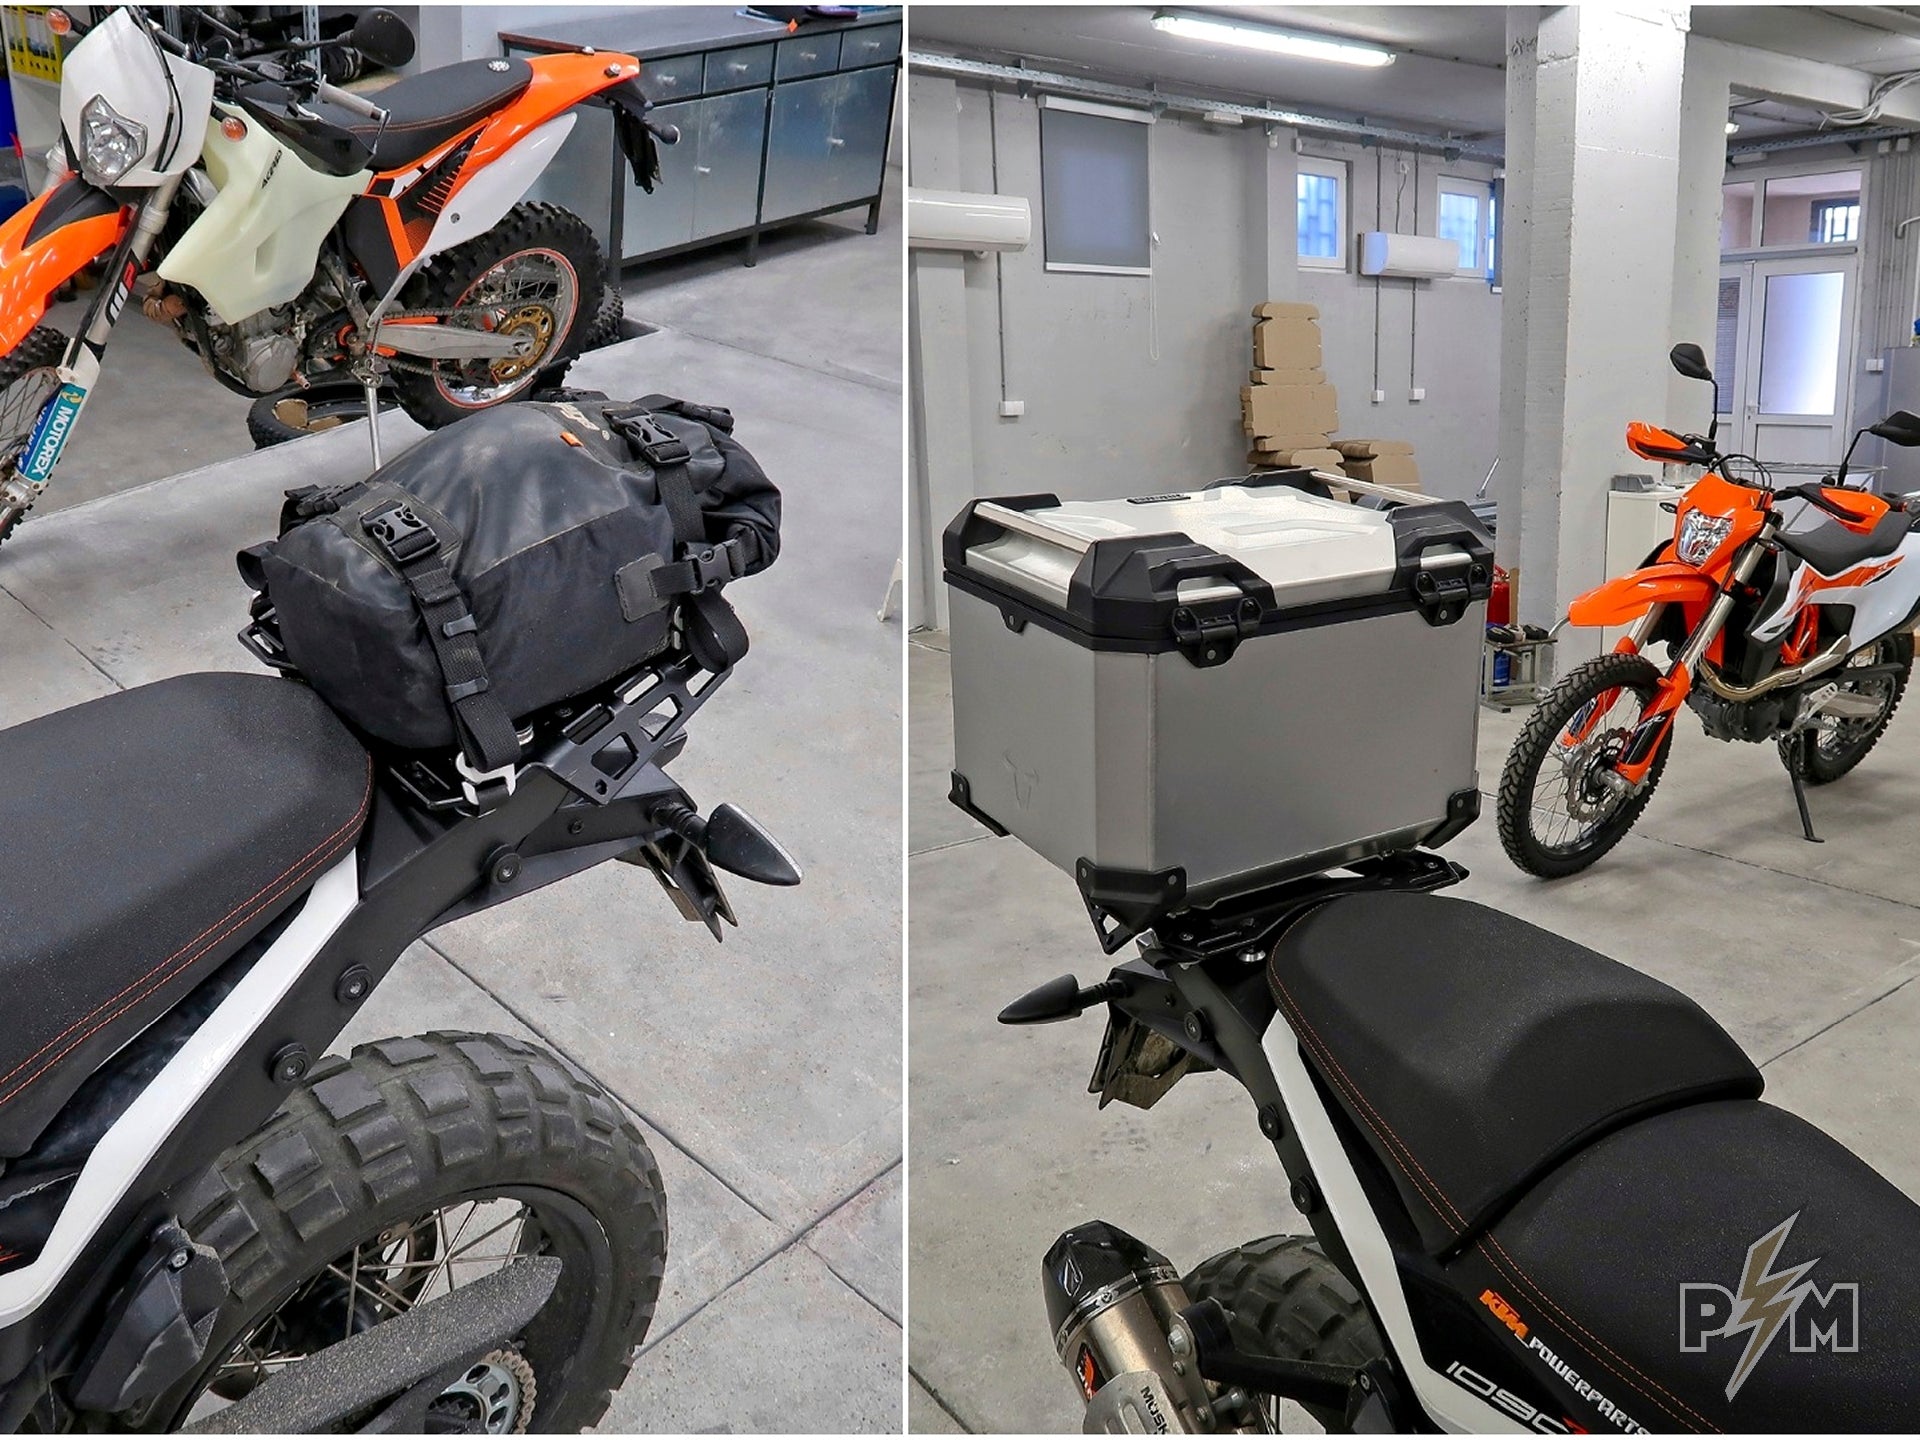 SW-Motech Trax 38l top case and Kriega US-20 on 1X90 Top luggage rack with Subplate